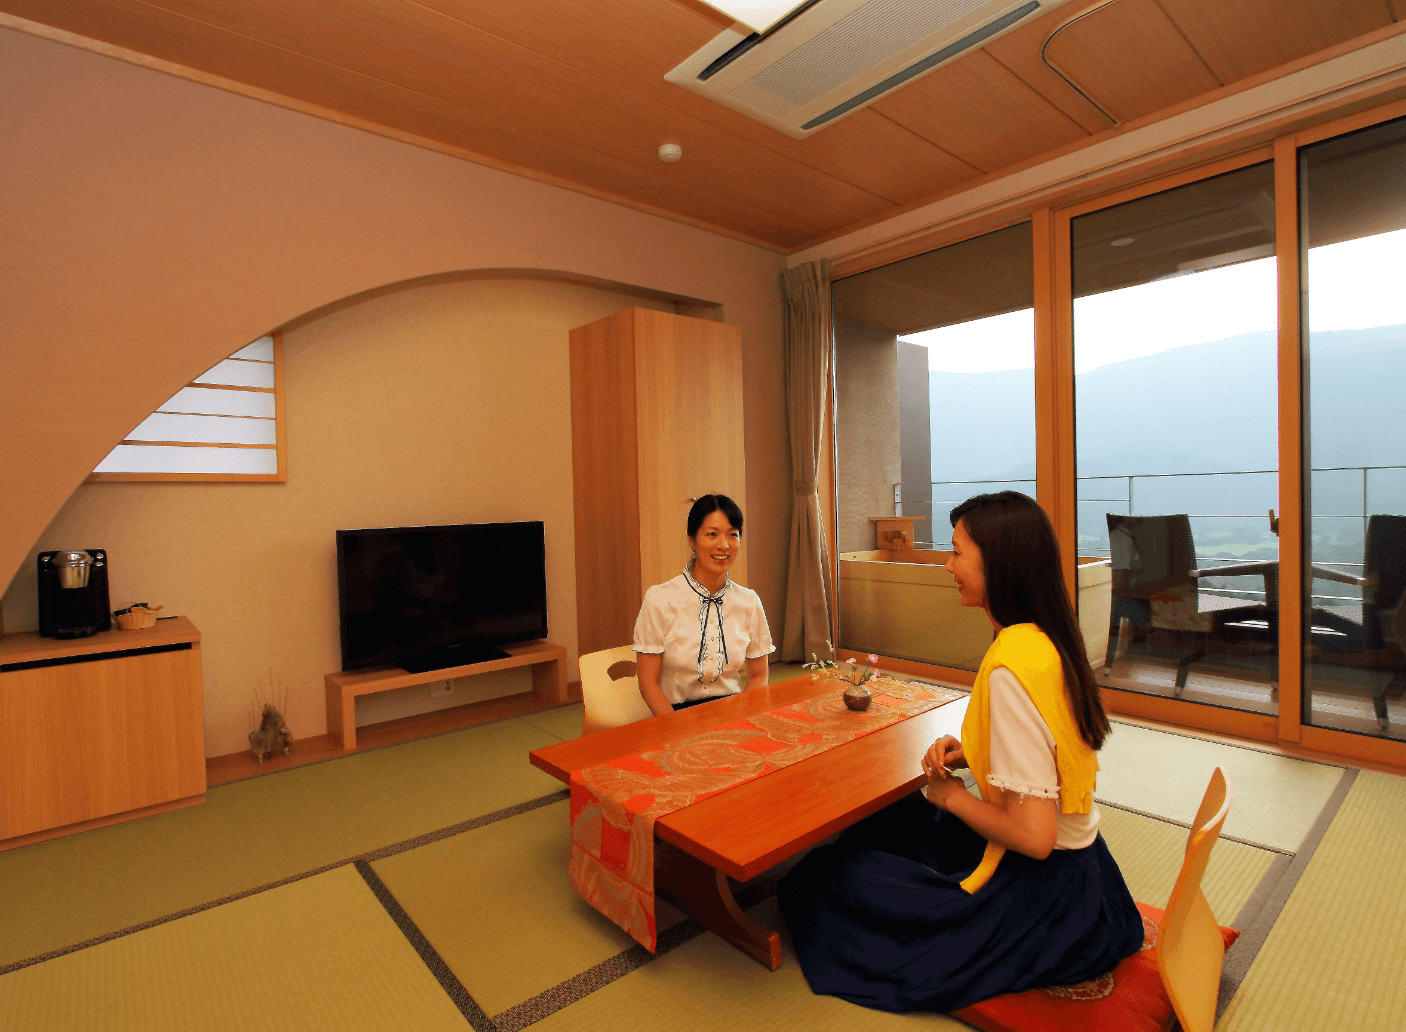 There is also a suite room with 8 tatami mats and a bedroom.